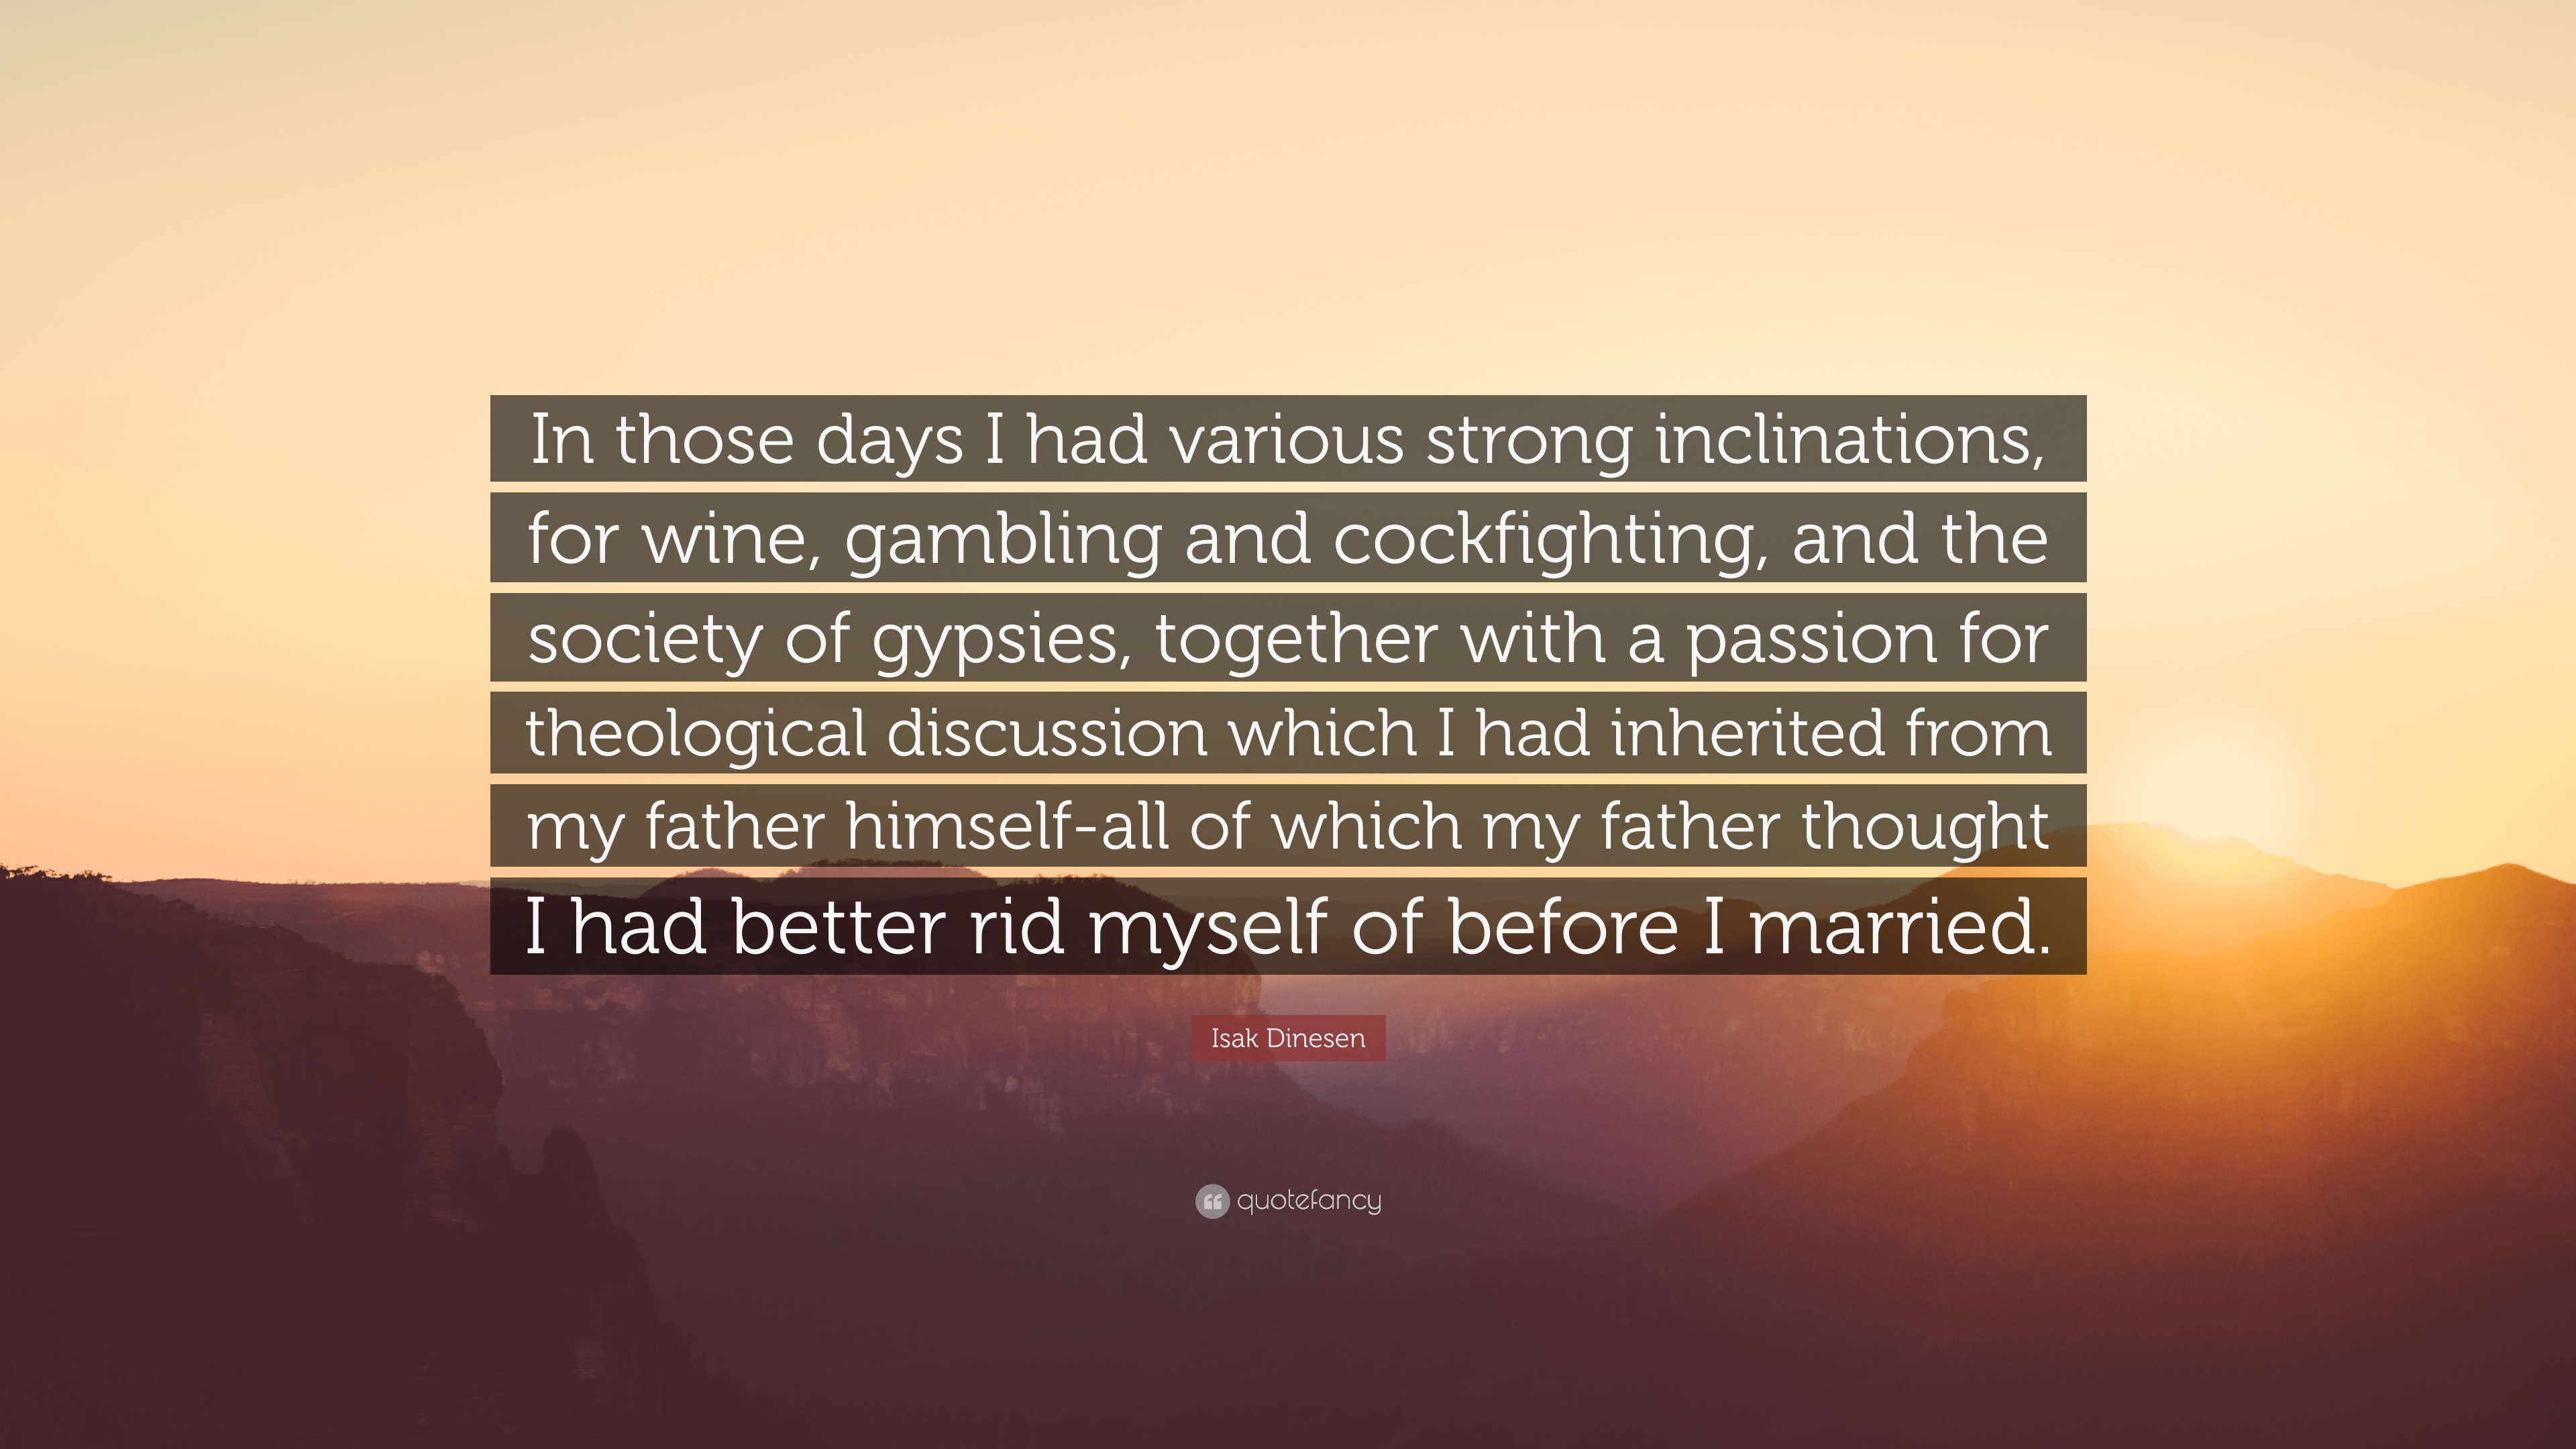 Isak Dinesen Quote: “In those days I had various strong inclinations